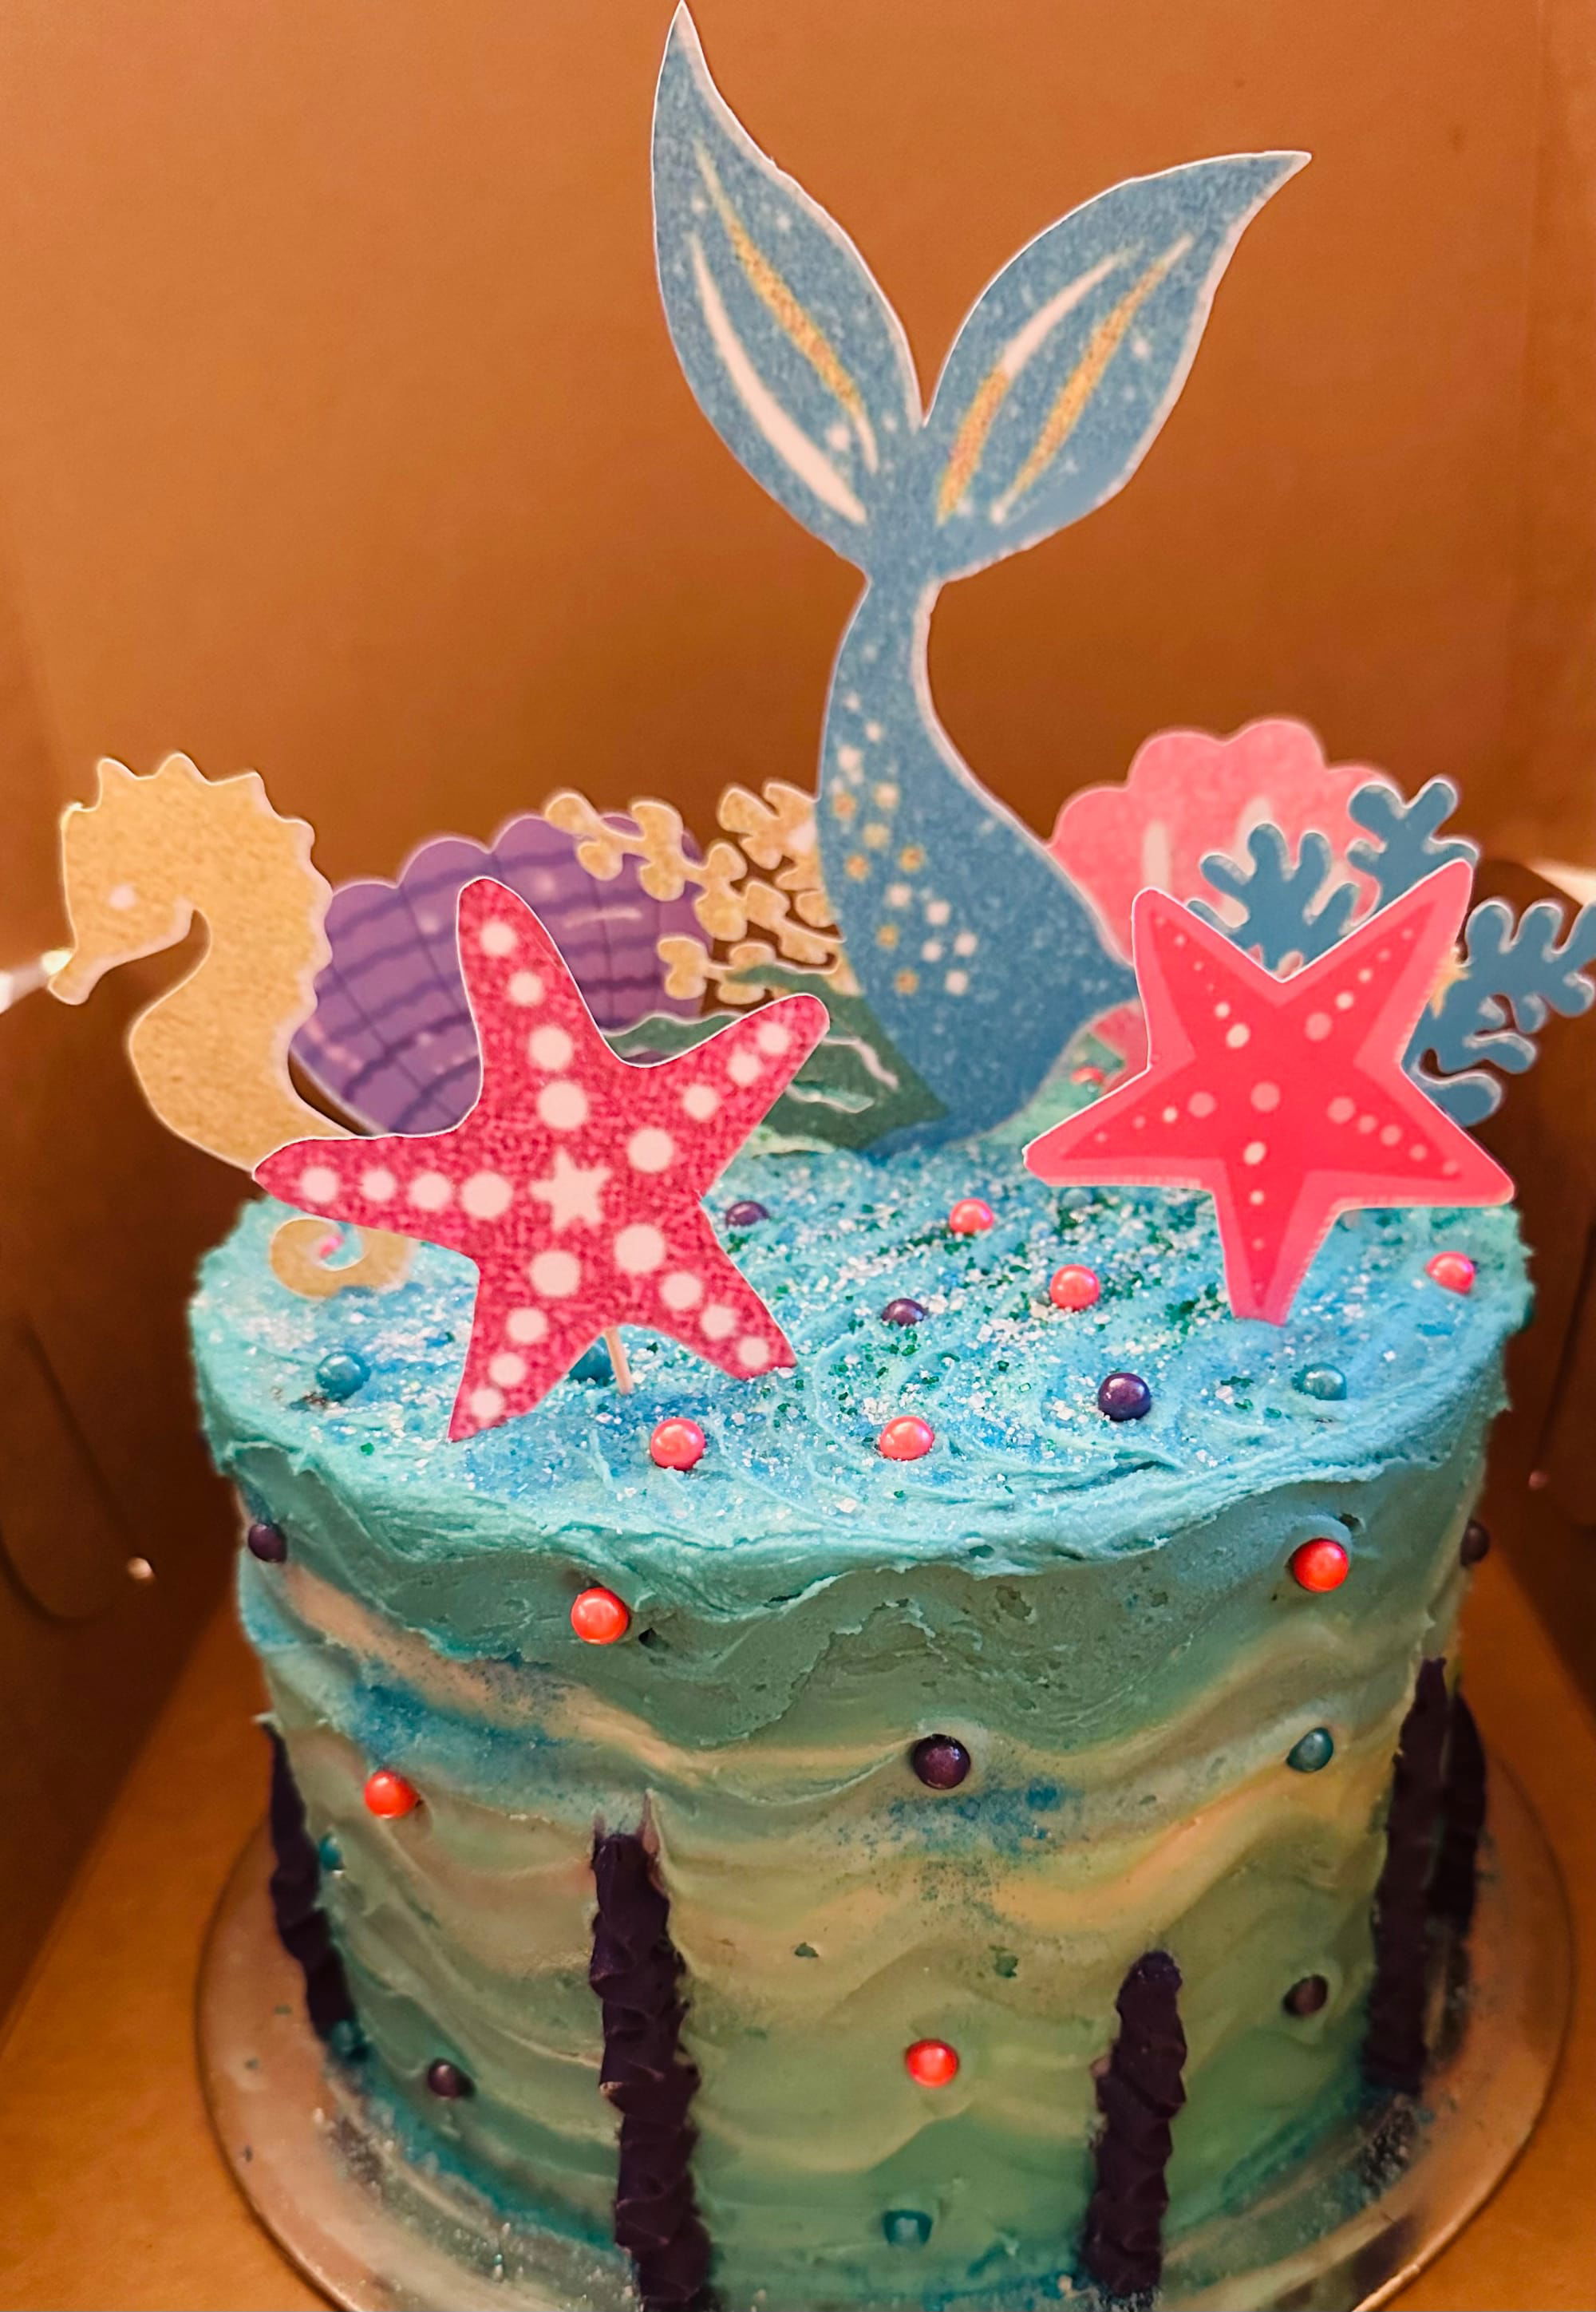 3 Layer Vanilla Mermaid Cake with Buttercream Frosting